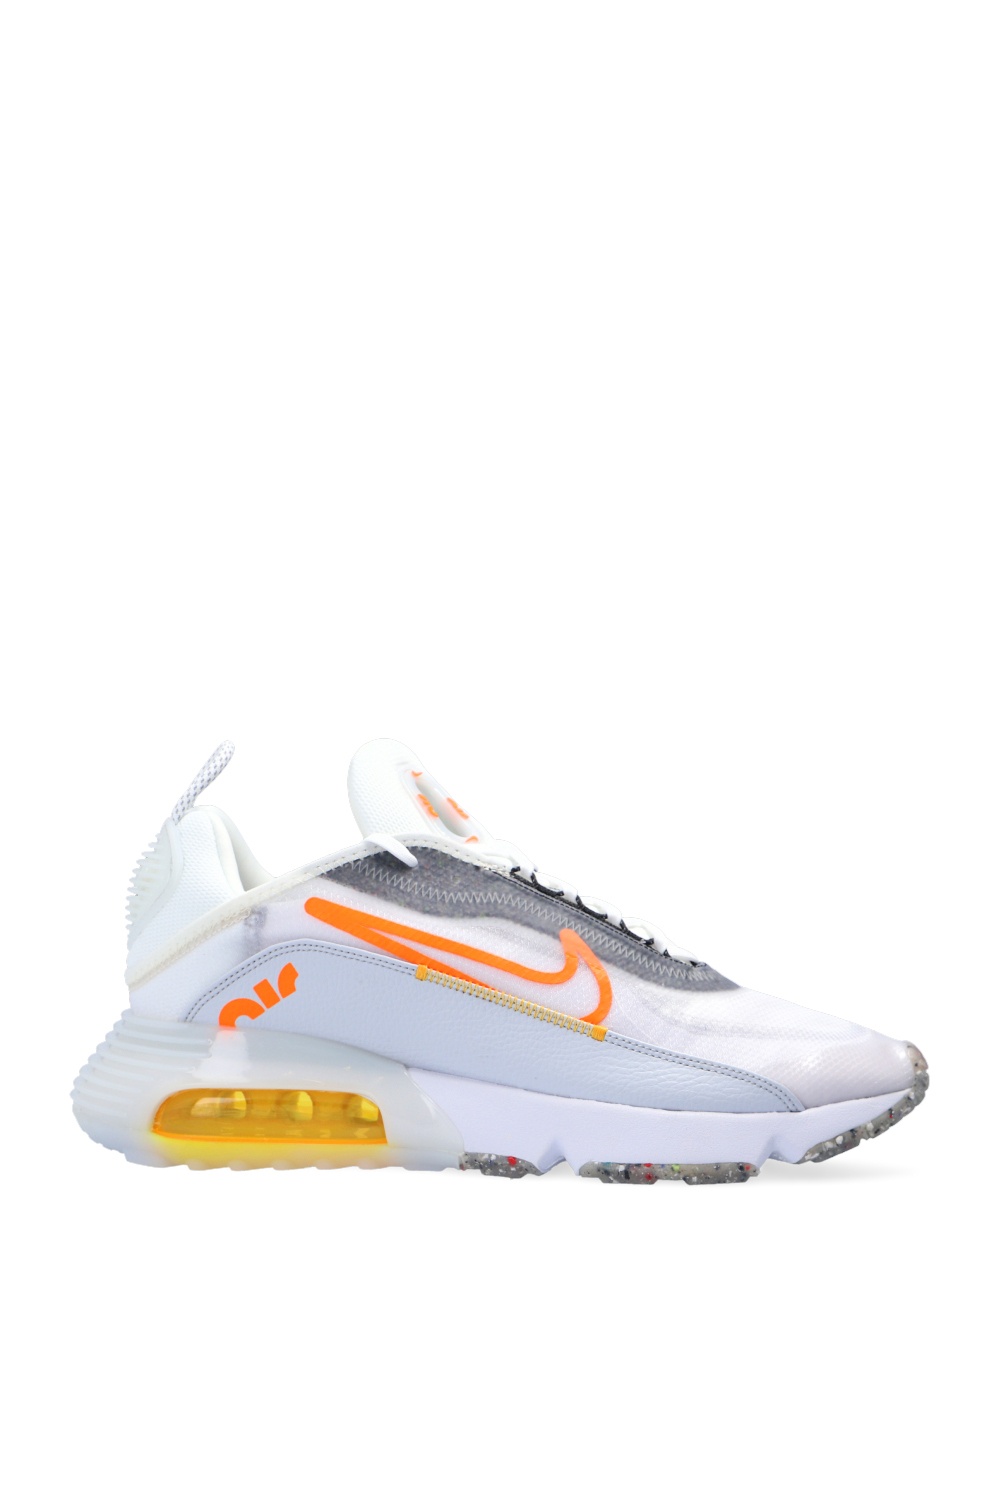 air max 2090 size guide